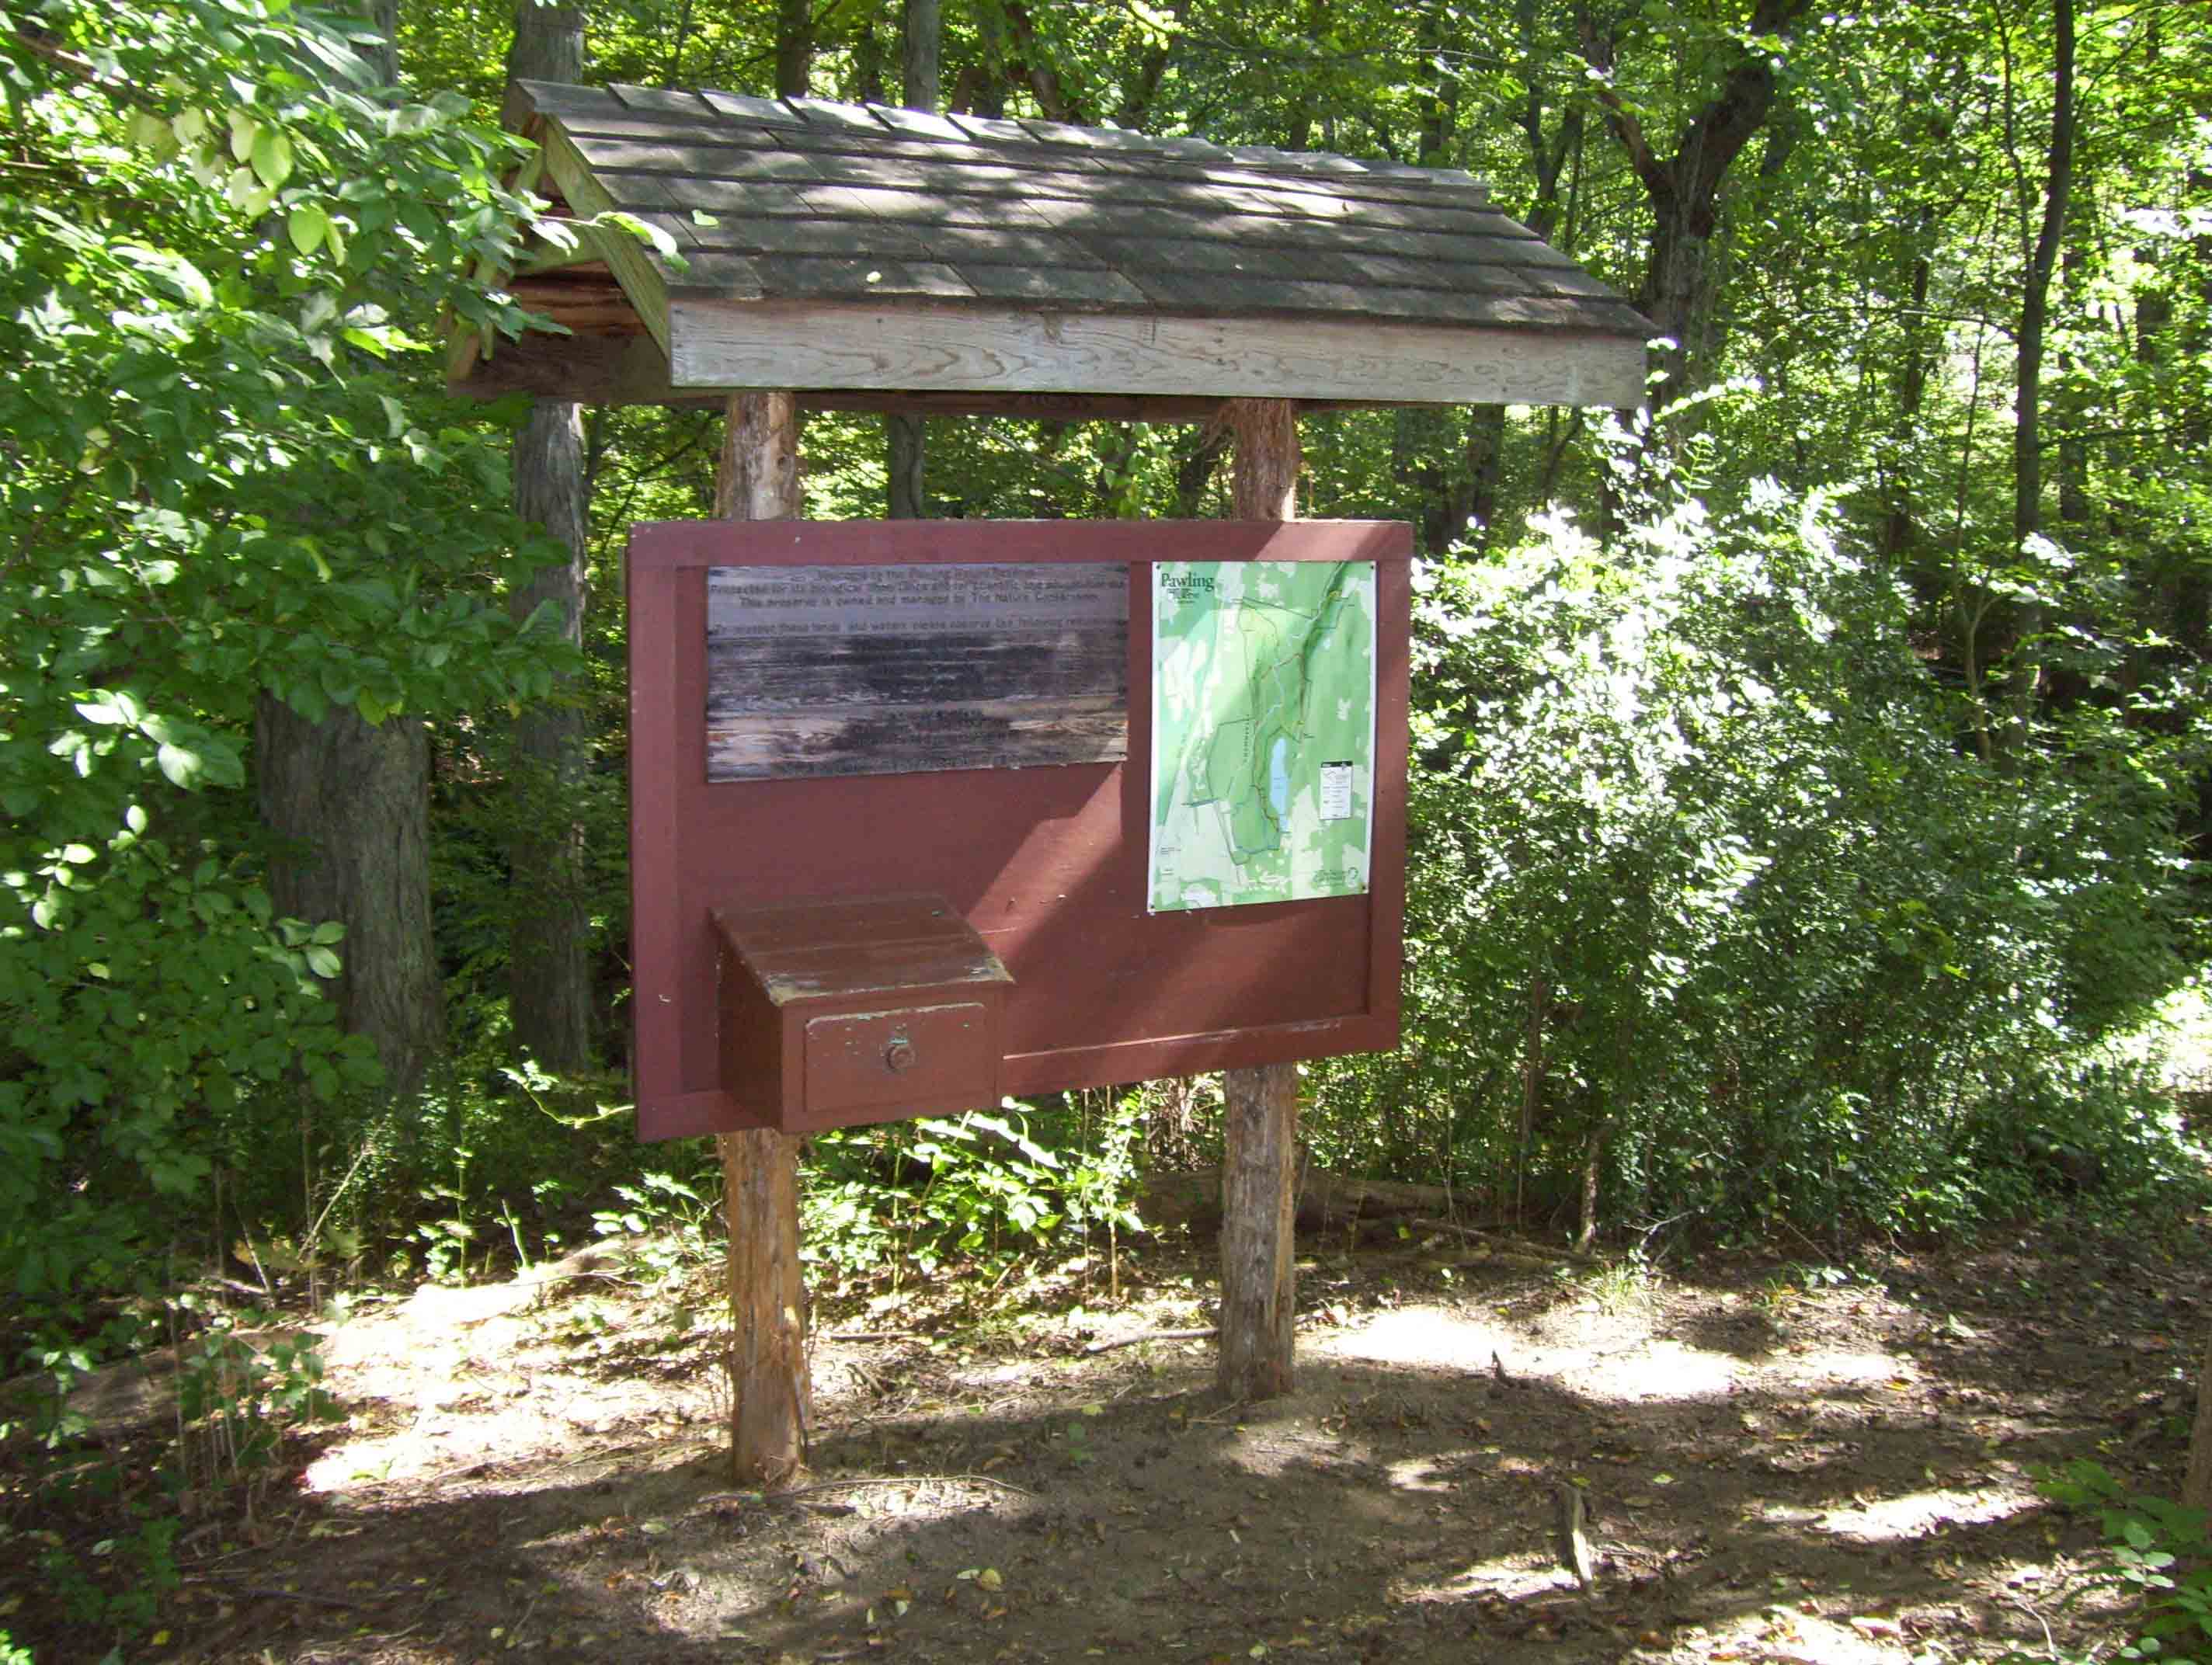 mm 6.0  Signboard at junction with the Pawling Nature Reserve Blue Trail. This is an old route of the AT that descends 0.3 miles to reach Old NY 22 (Hurds Corner Road).  Courtesy dlcul@conncoll.edu